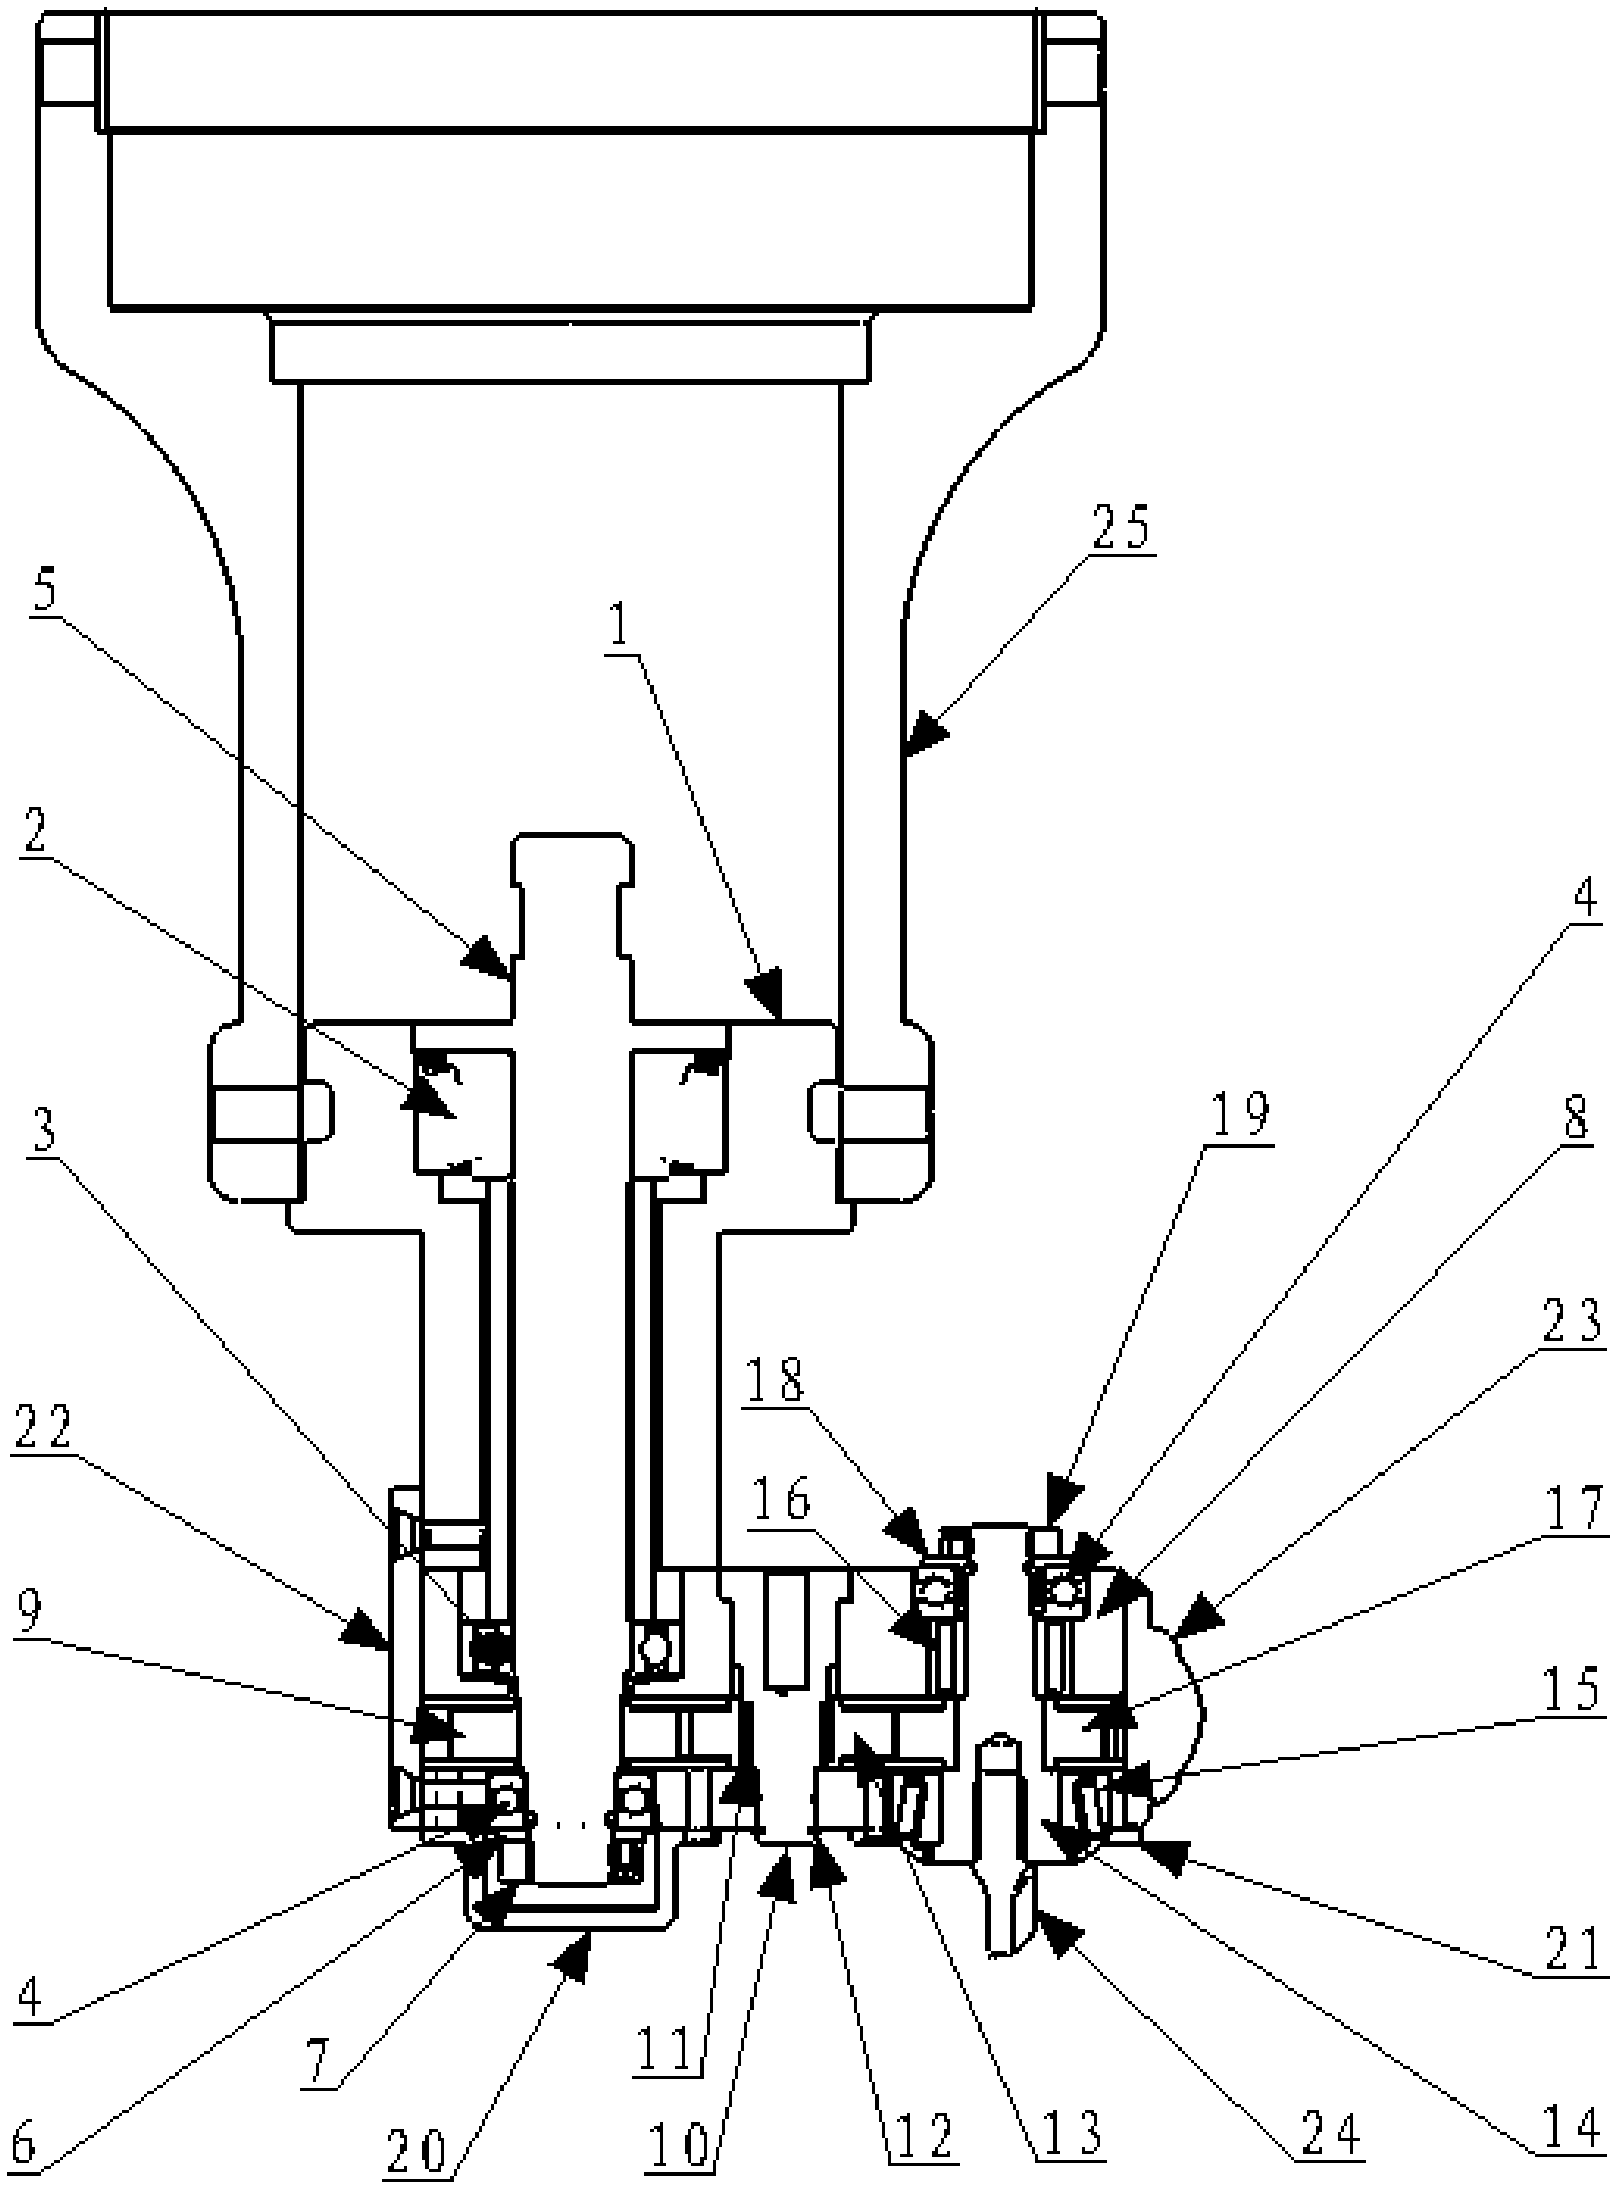 Direction-variable cutting tool